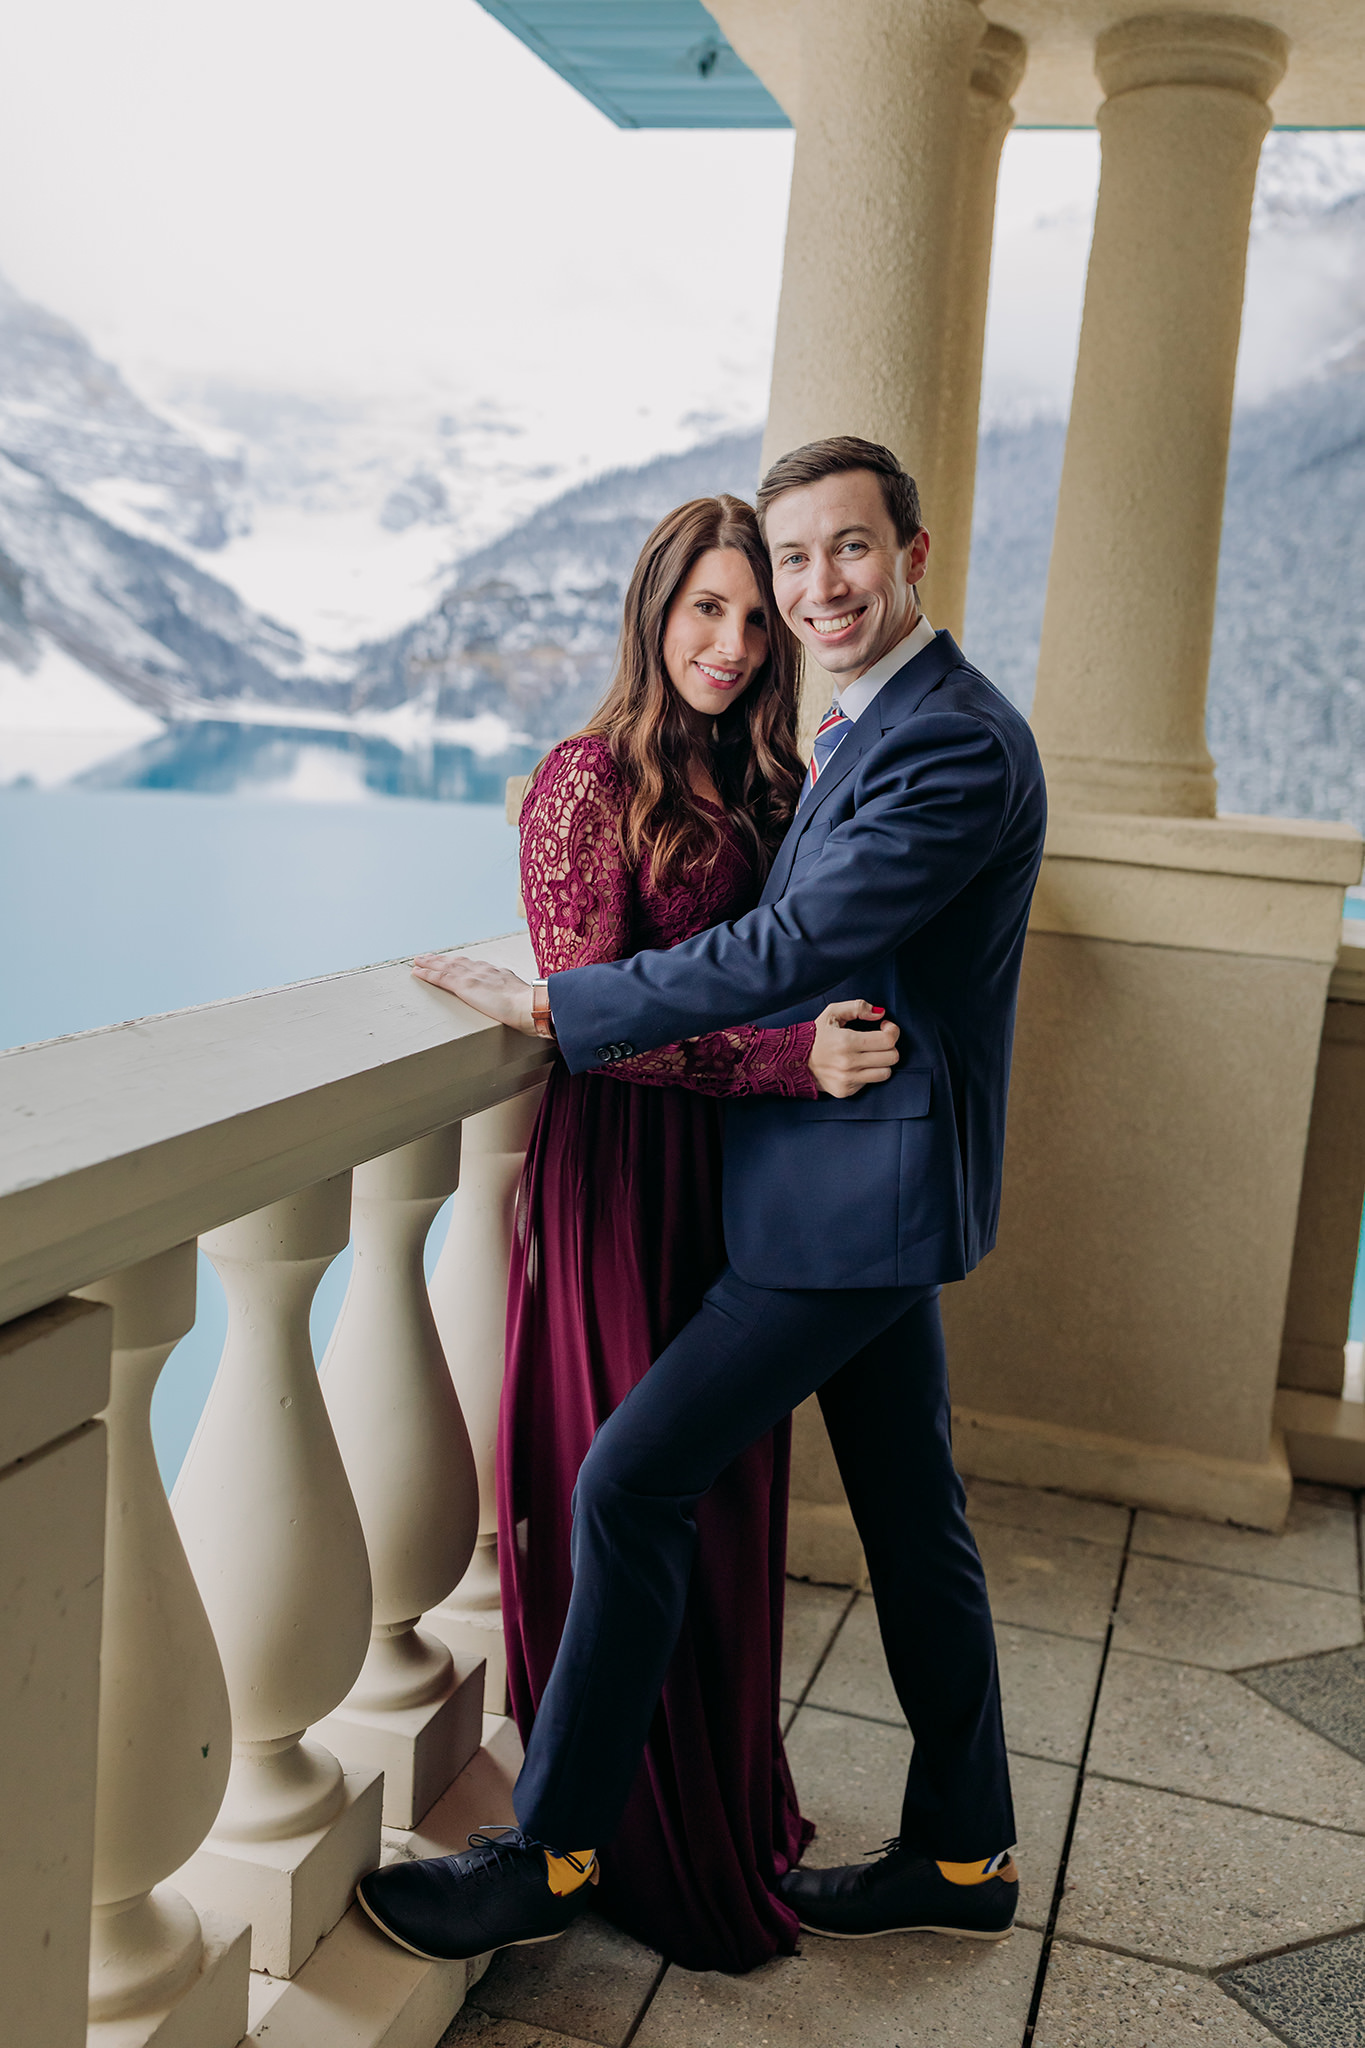 Lake Louise in October Magical SNowy formal mountain engagement photography session in the Belvedere Suite at Fairmont Chateau Lake Louise